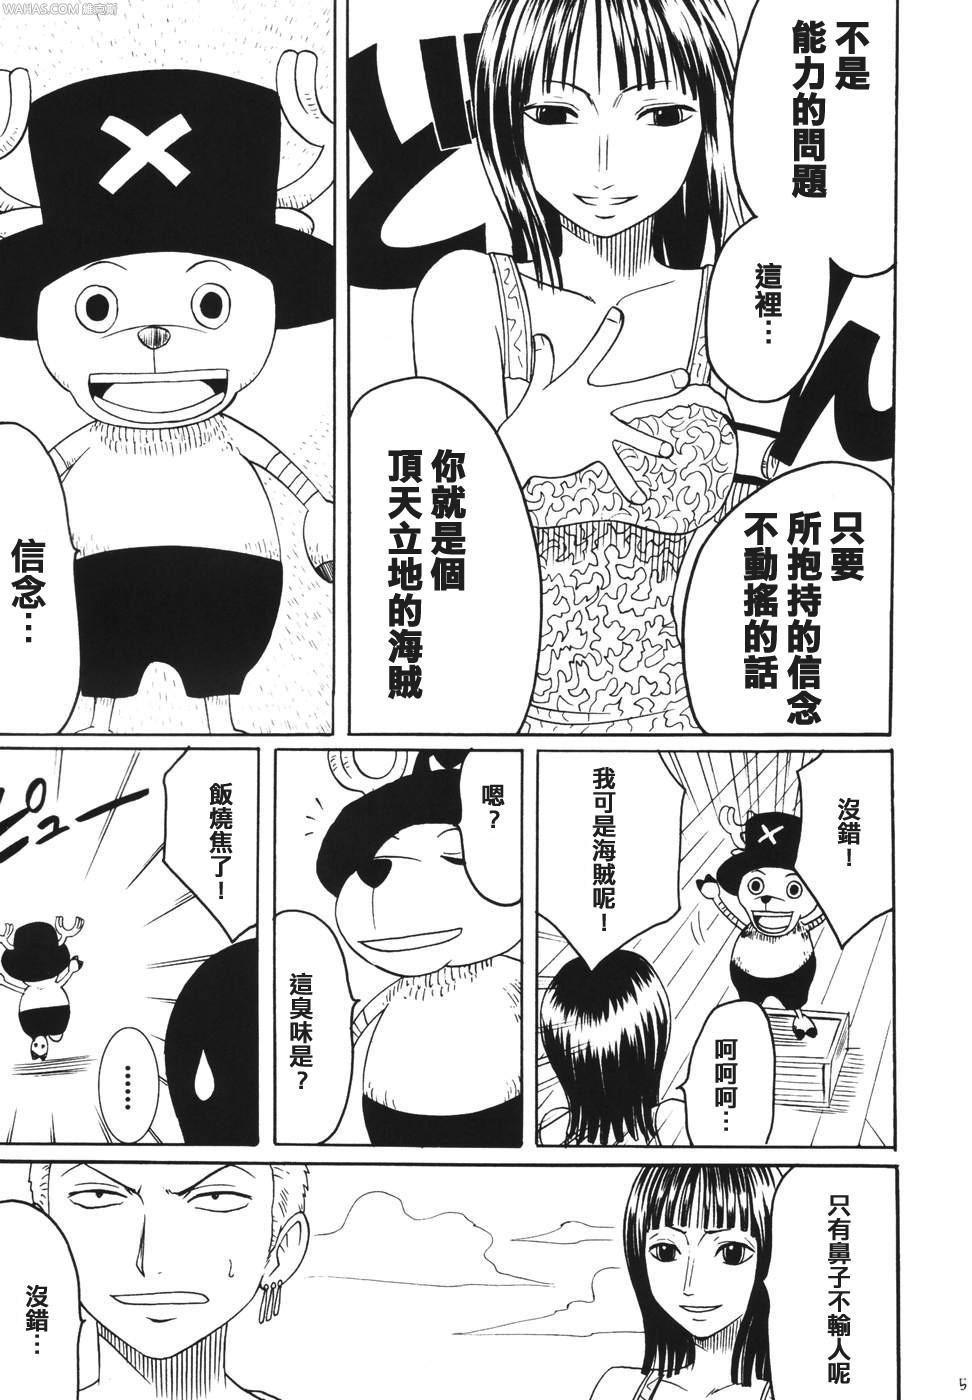 Striptease Dancing Animation Run - One piece Body - Page 4